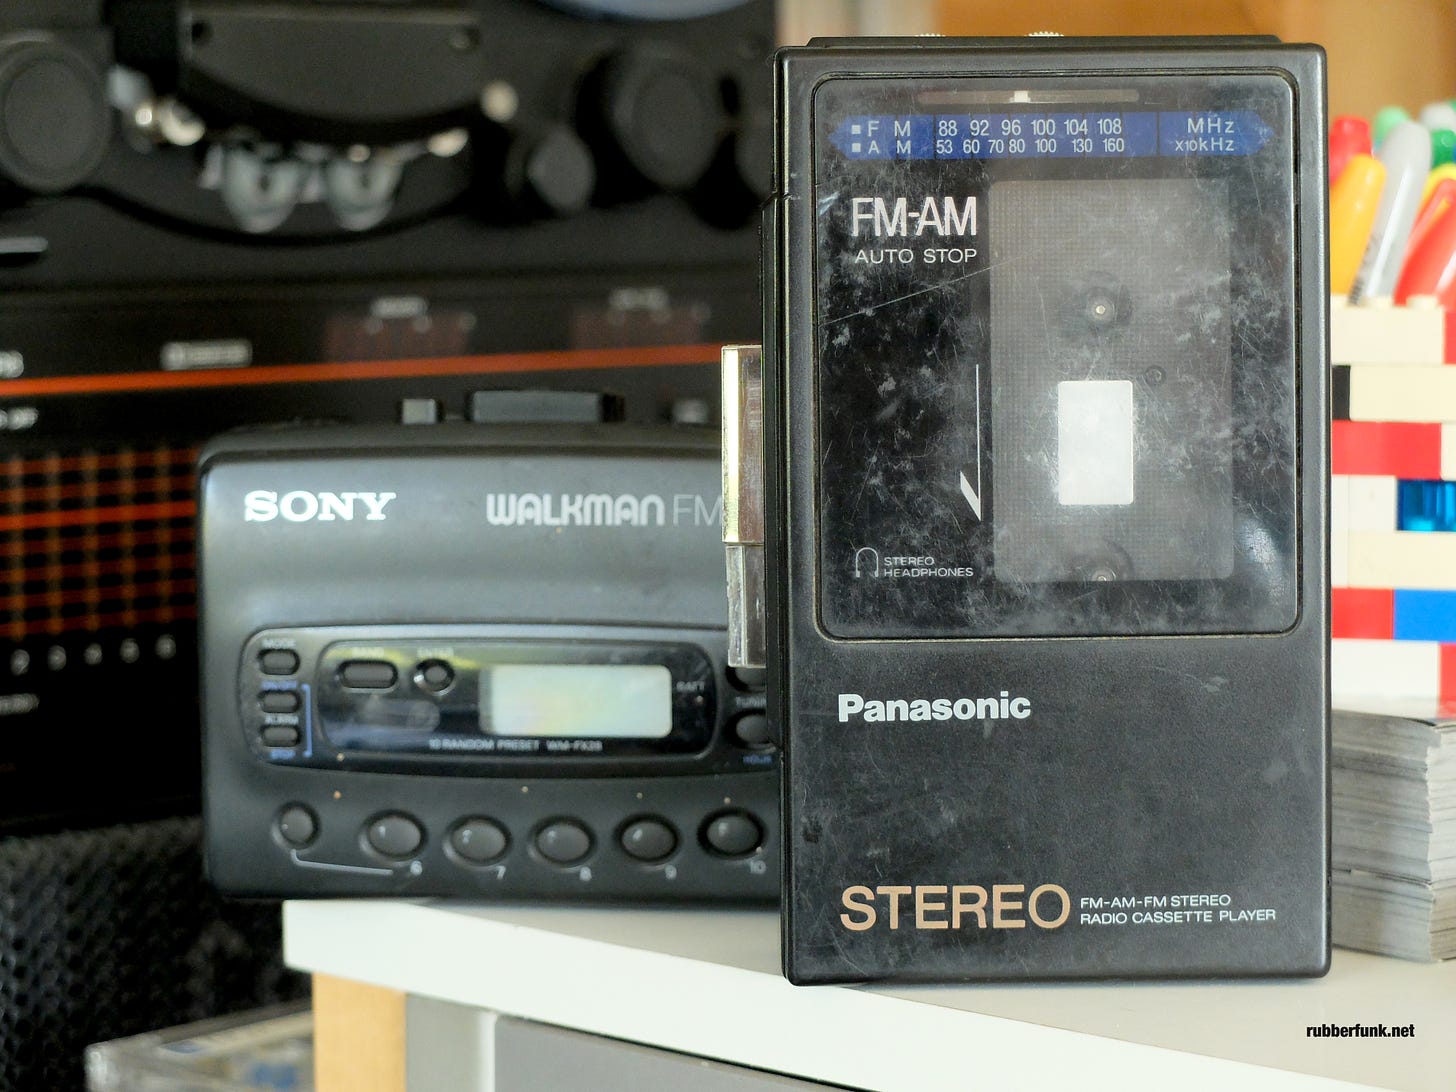 Panasonic RX-1925 and SONY WM-FX28 portable cassette players.